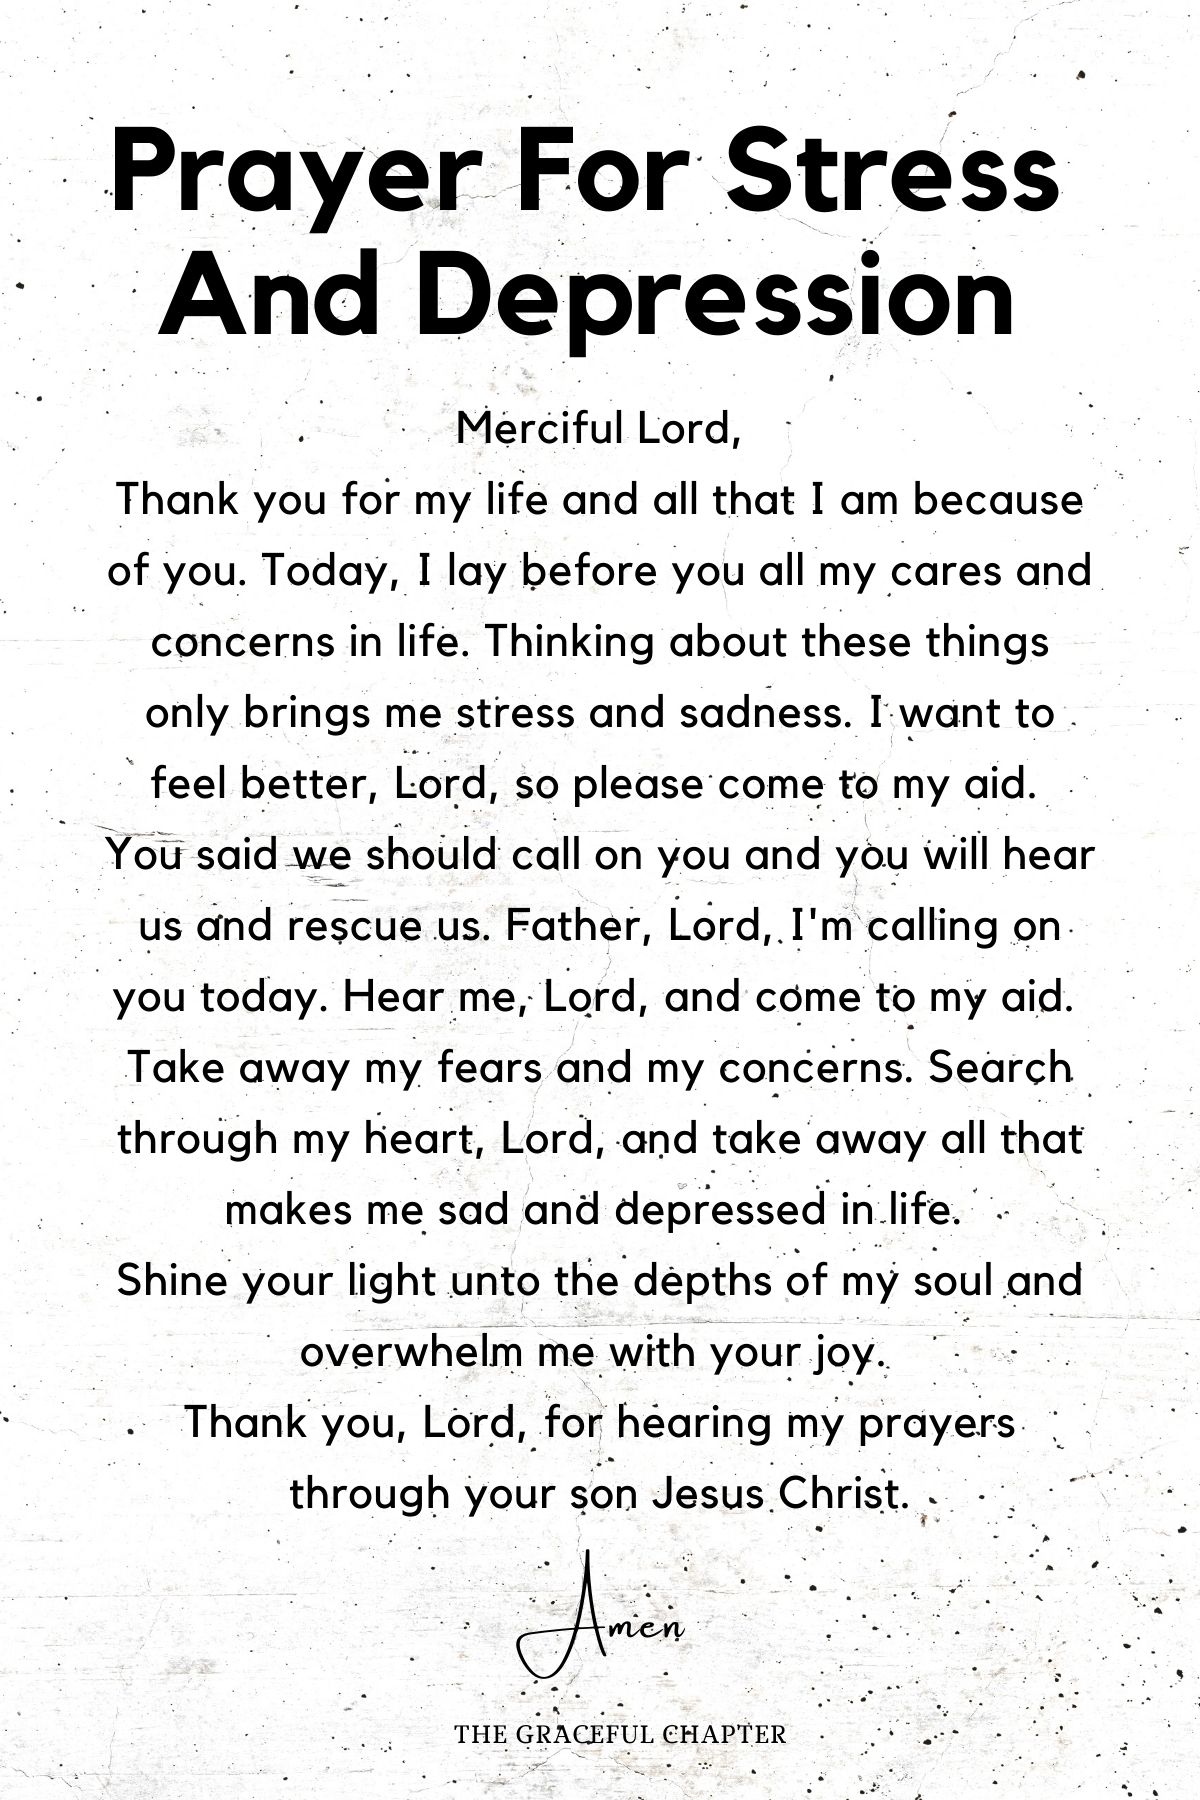 Prayer for stress and depression